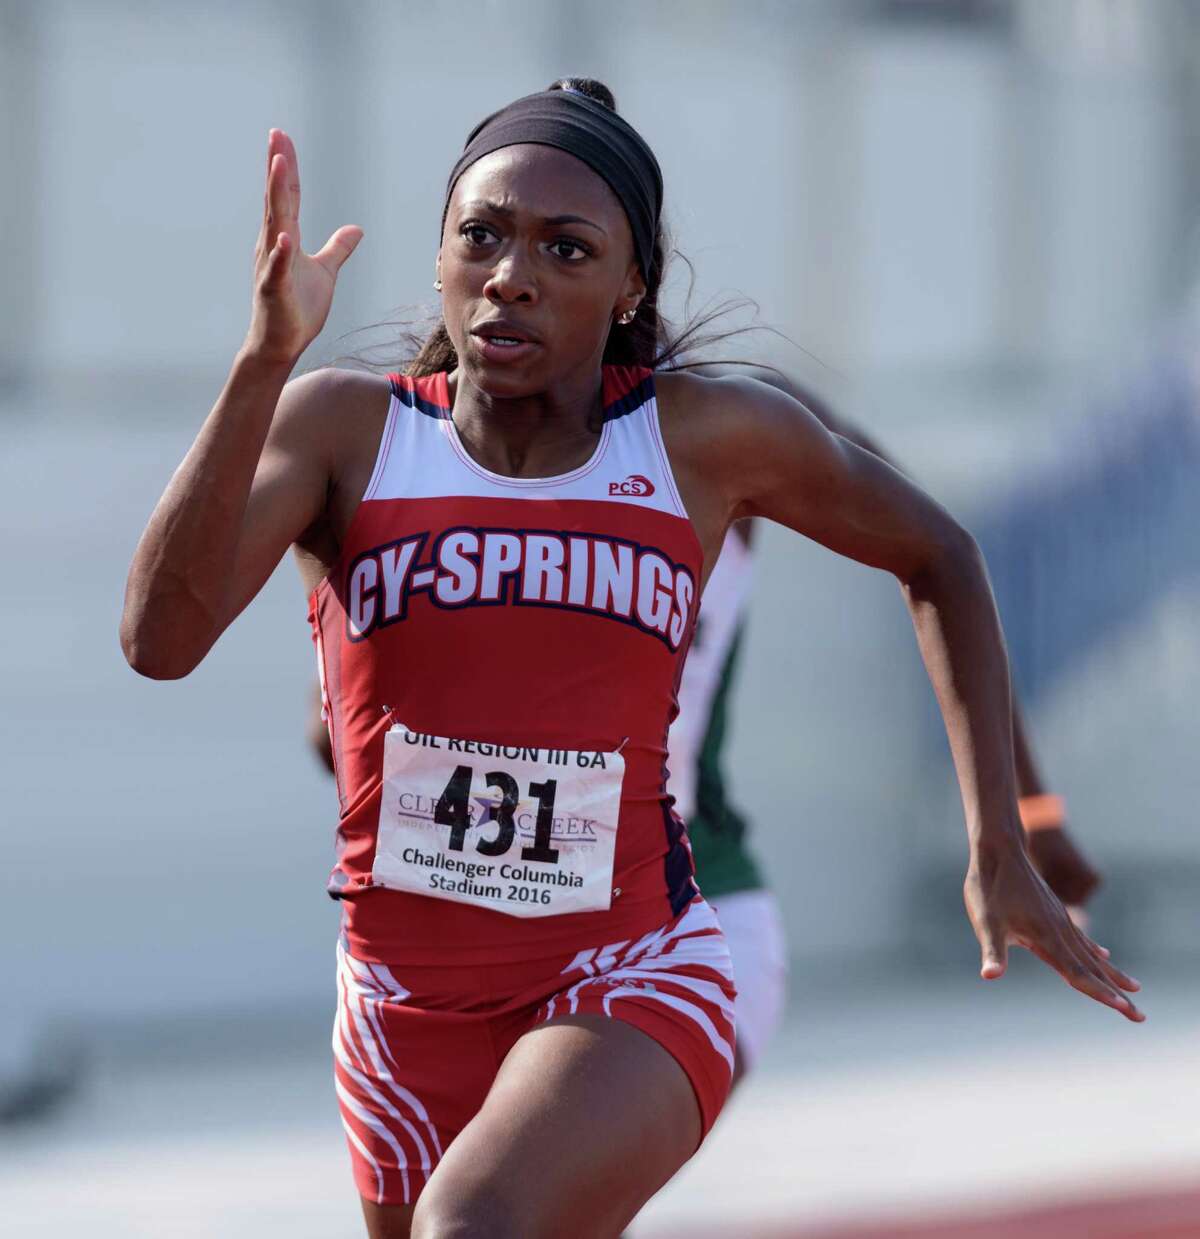 Sierra Smith of Cy-Fairs High School won the 200 Meter Dash at the 6A Region III Championships on Saturday, April 30, 2016 at the Challenger Columbia Stadium.